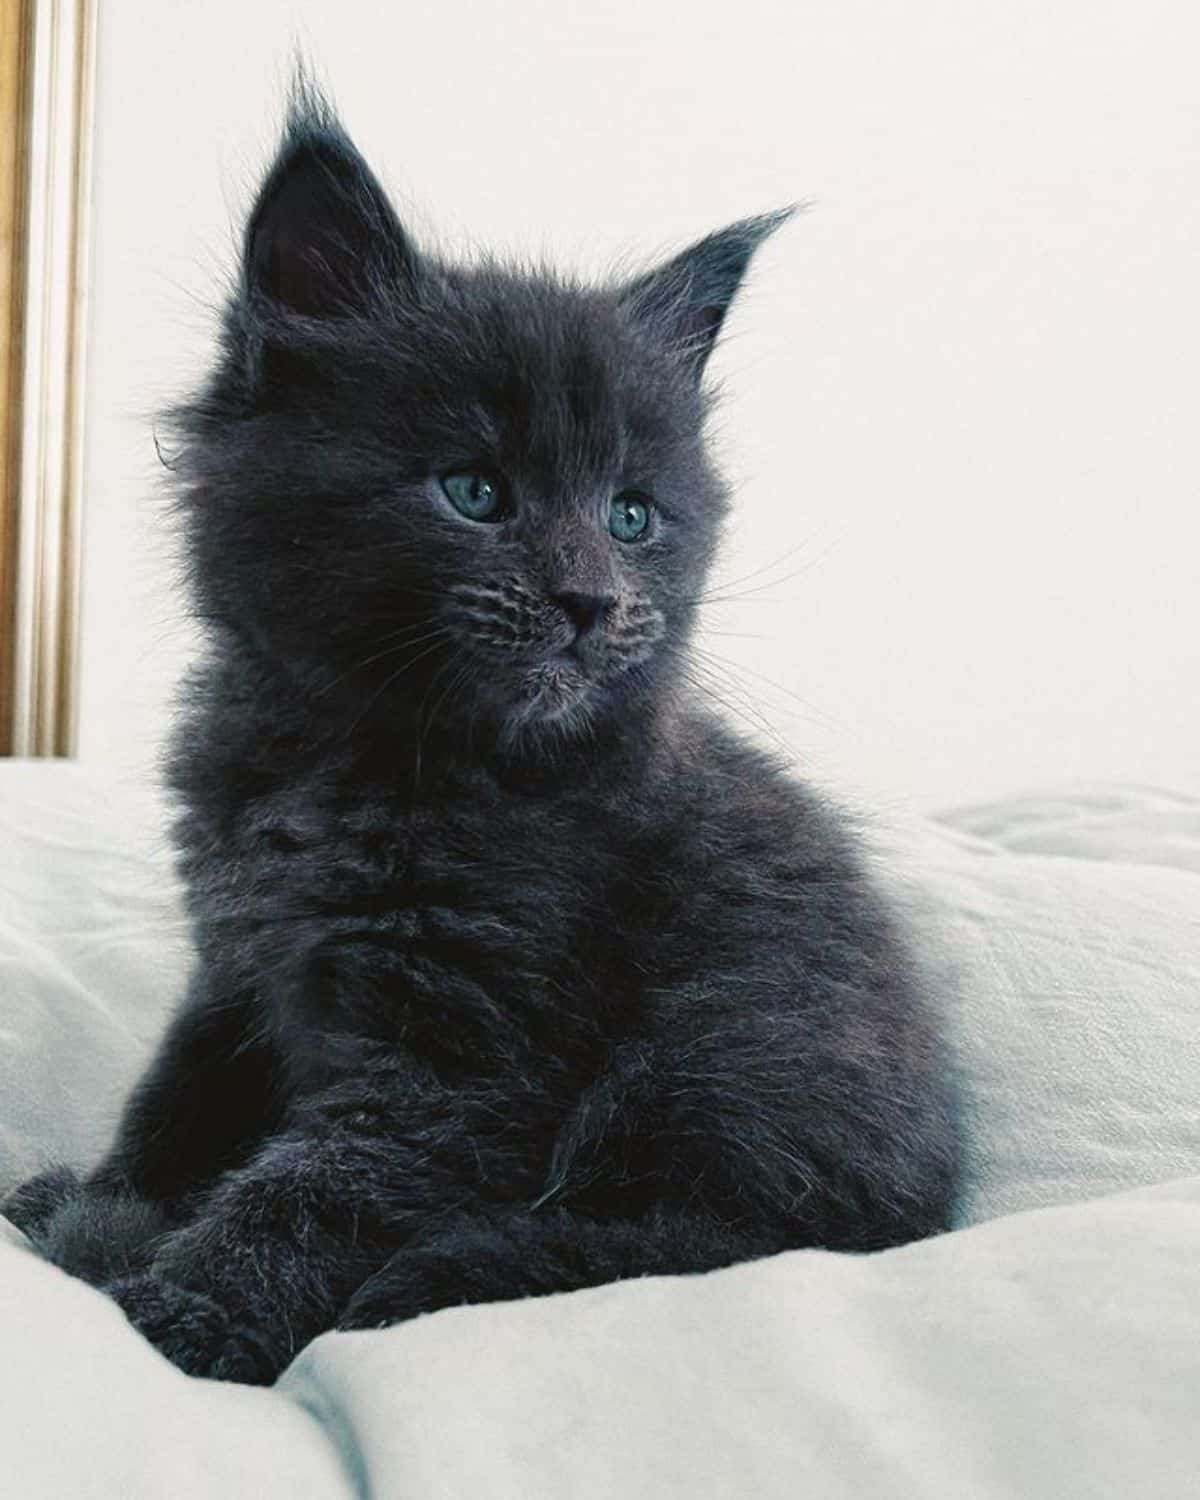 A cute blue maine coon siting on a bed.